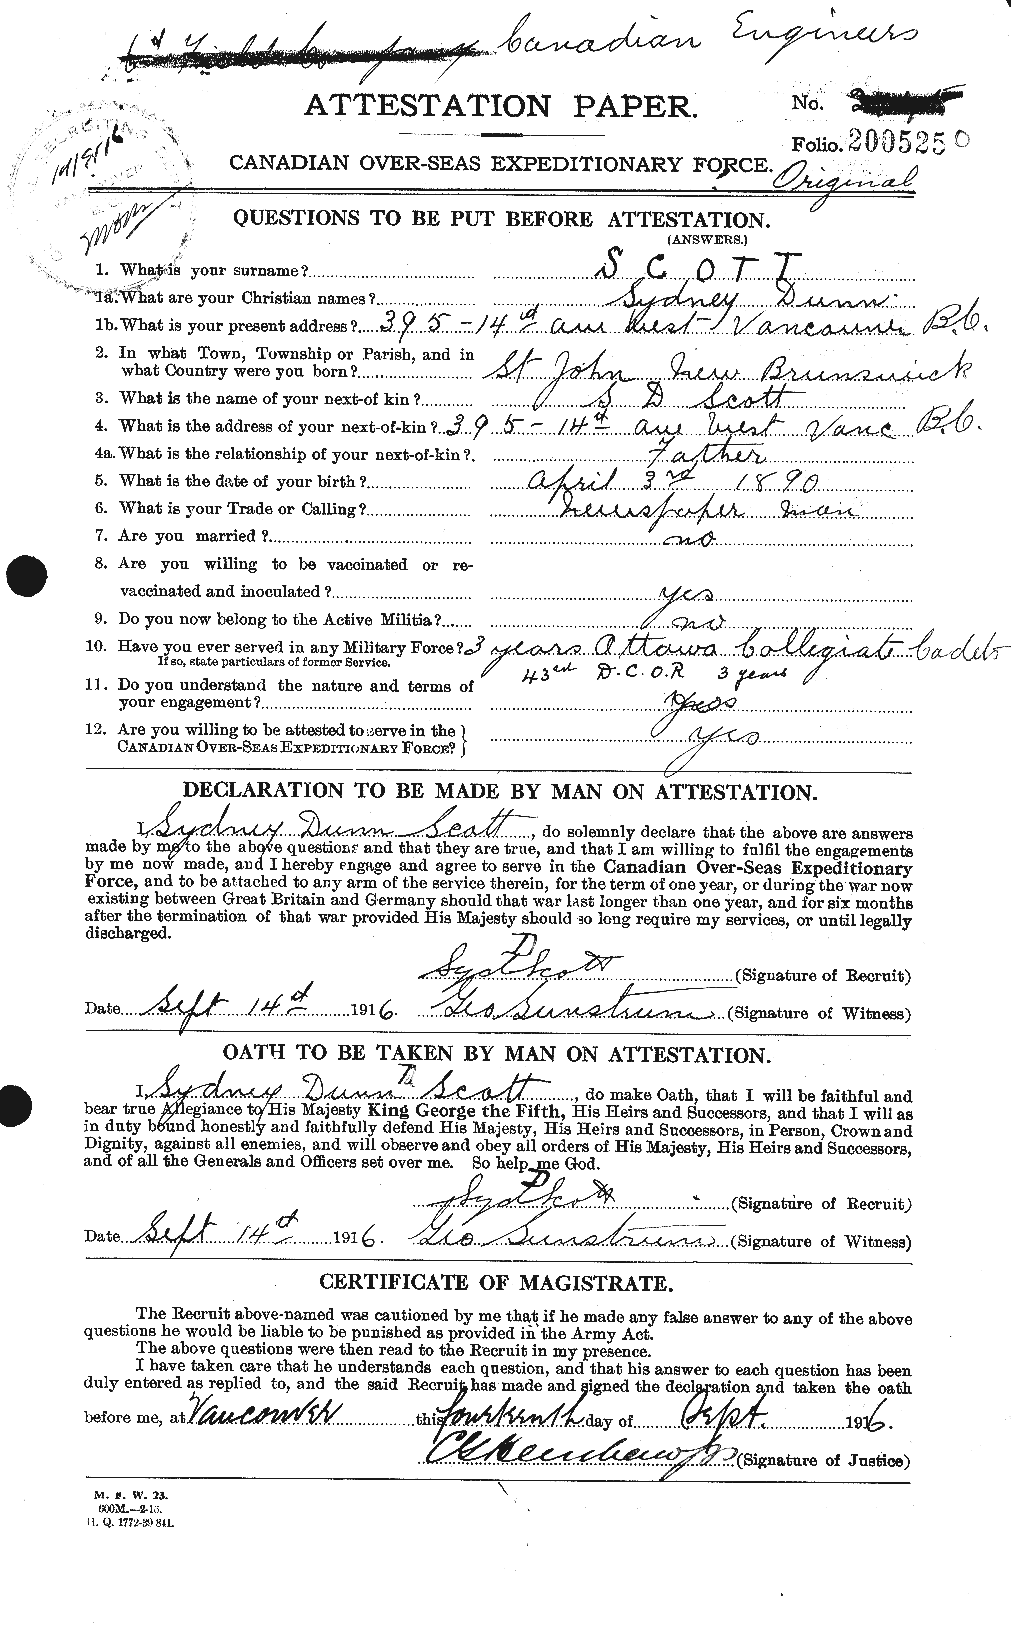 Personnel Records of the First World War - CEF 088550a